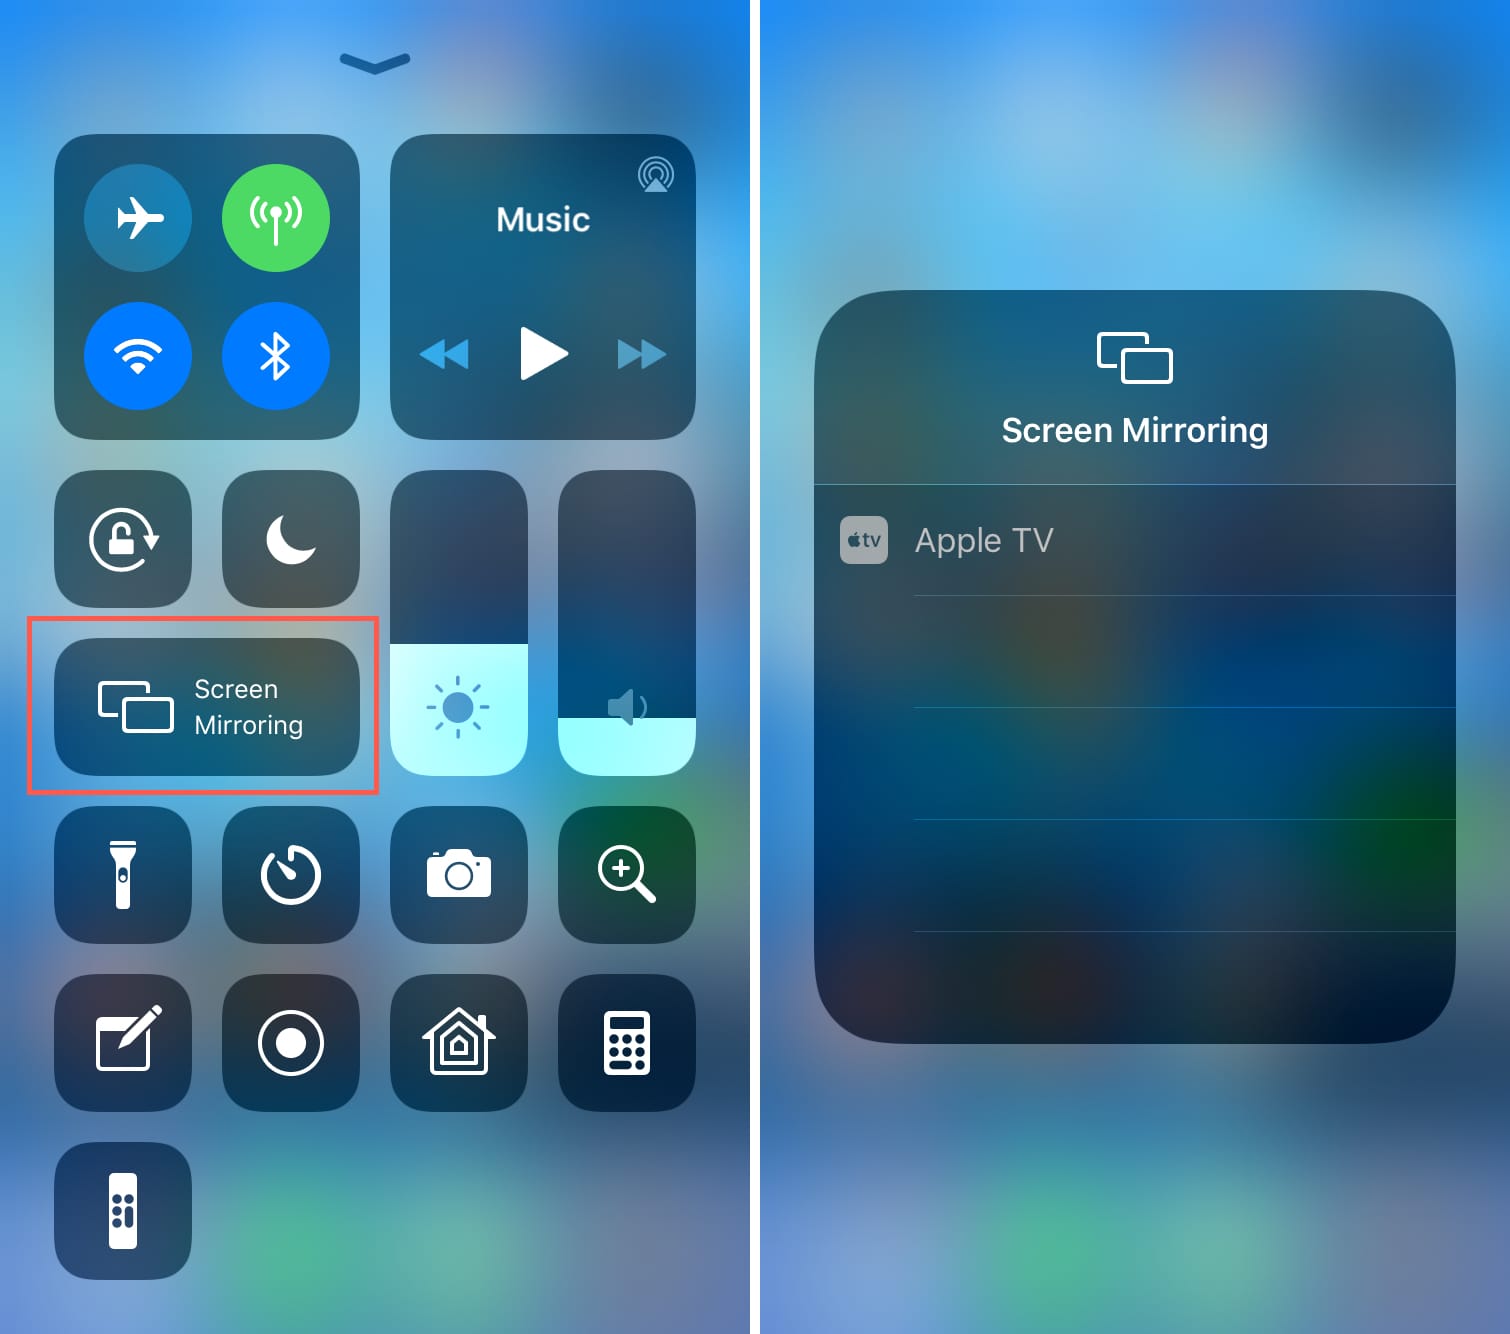 Iphone Or Ipad Display To Apple Tv, How To Screen Mirror Without Apple Tv